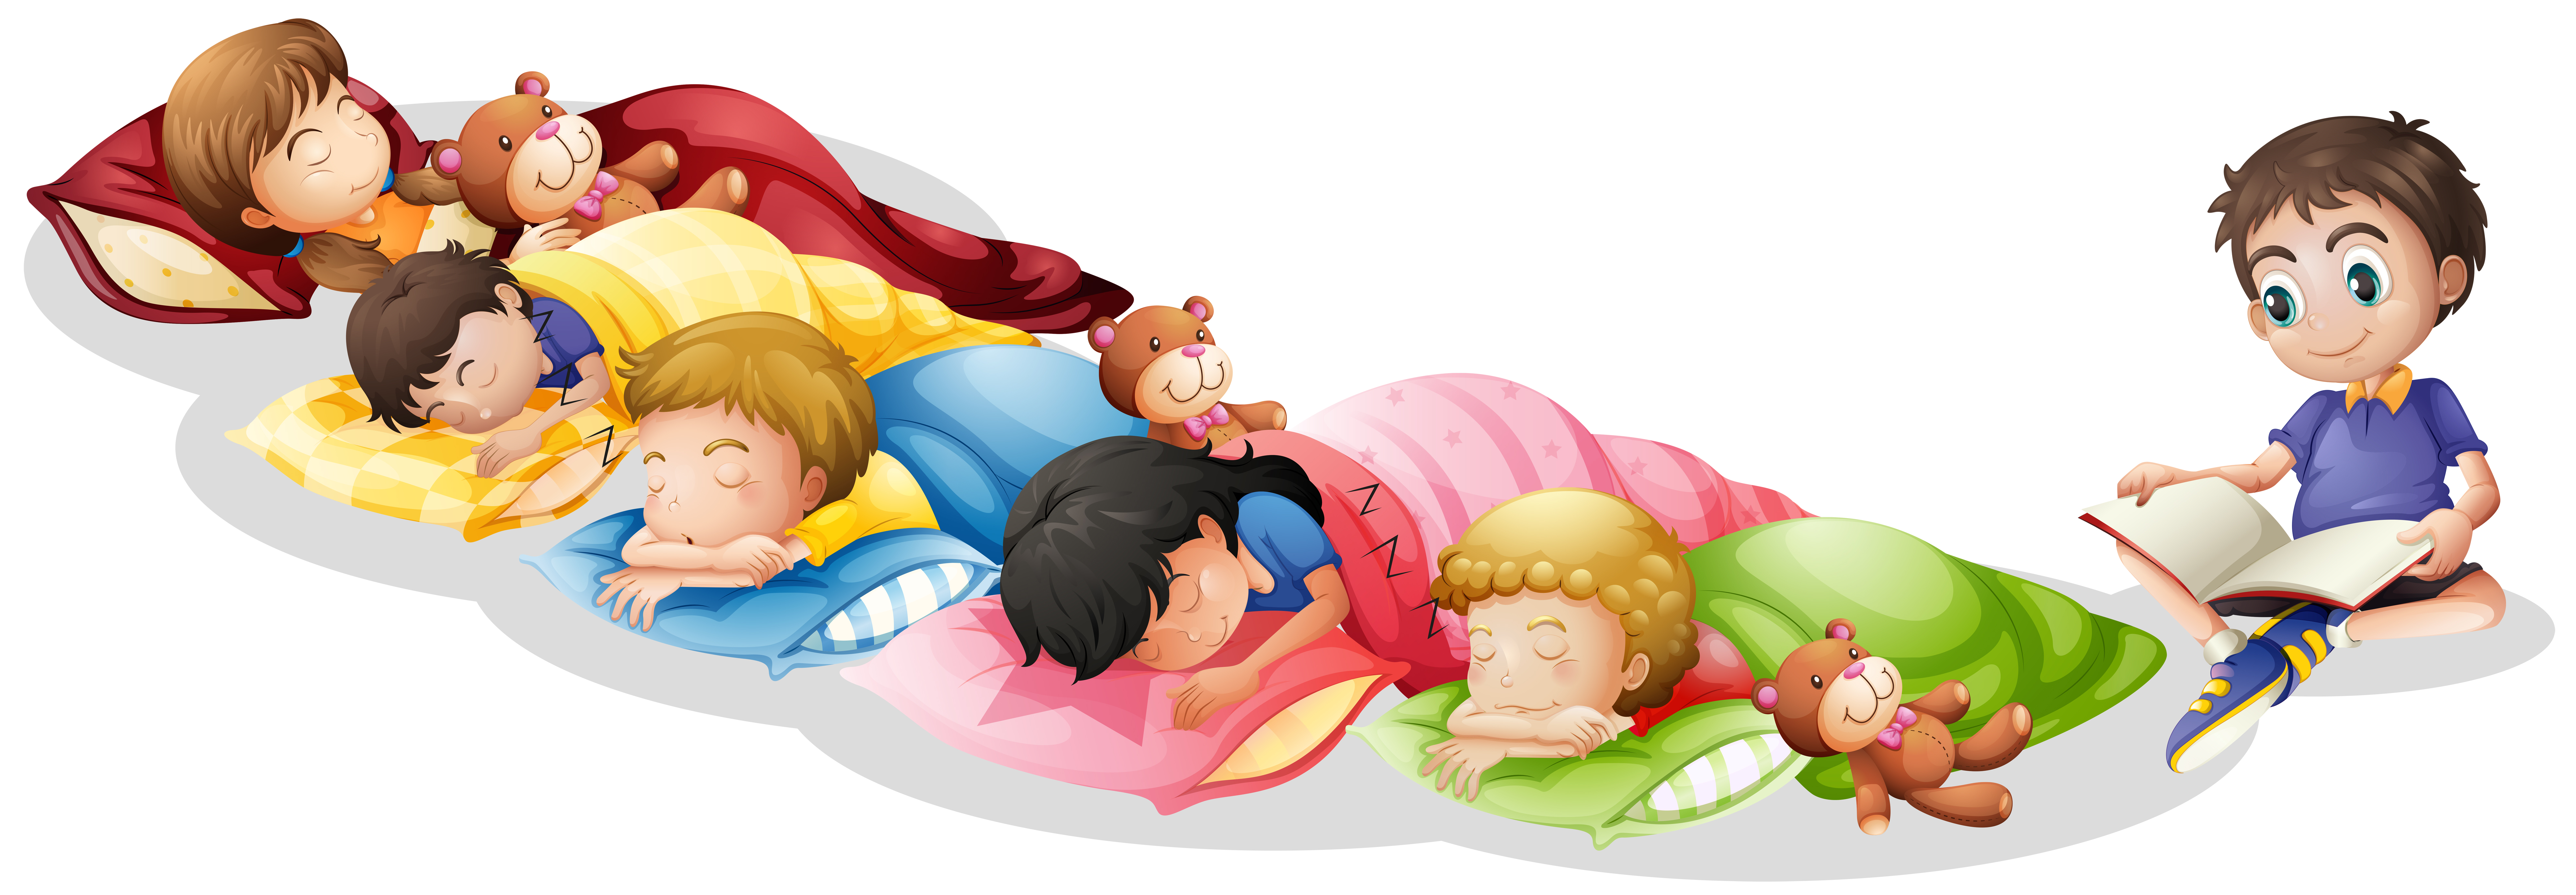 Browse 263 incredible Nap Time vectors, icons, clipart graphics, and backgr...